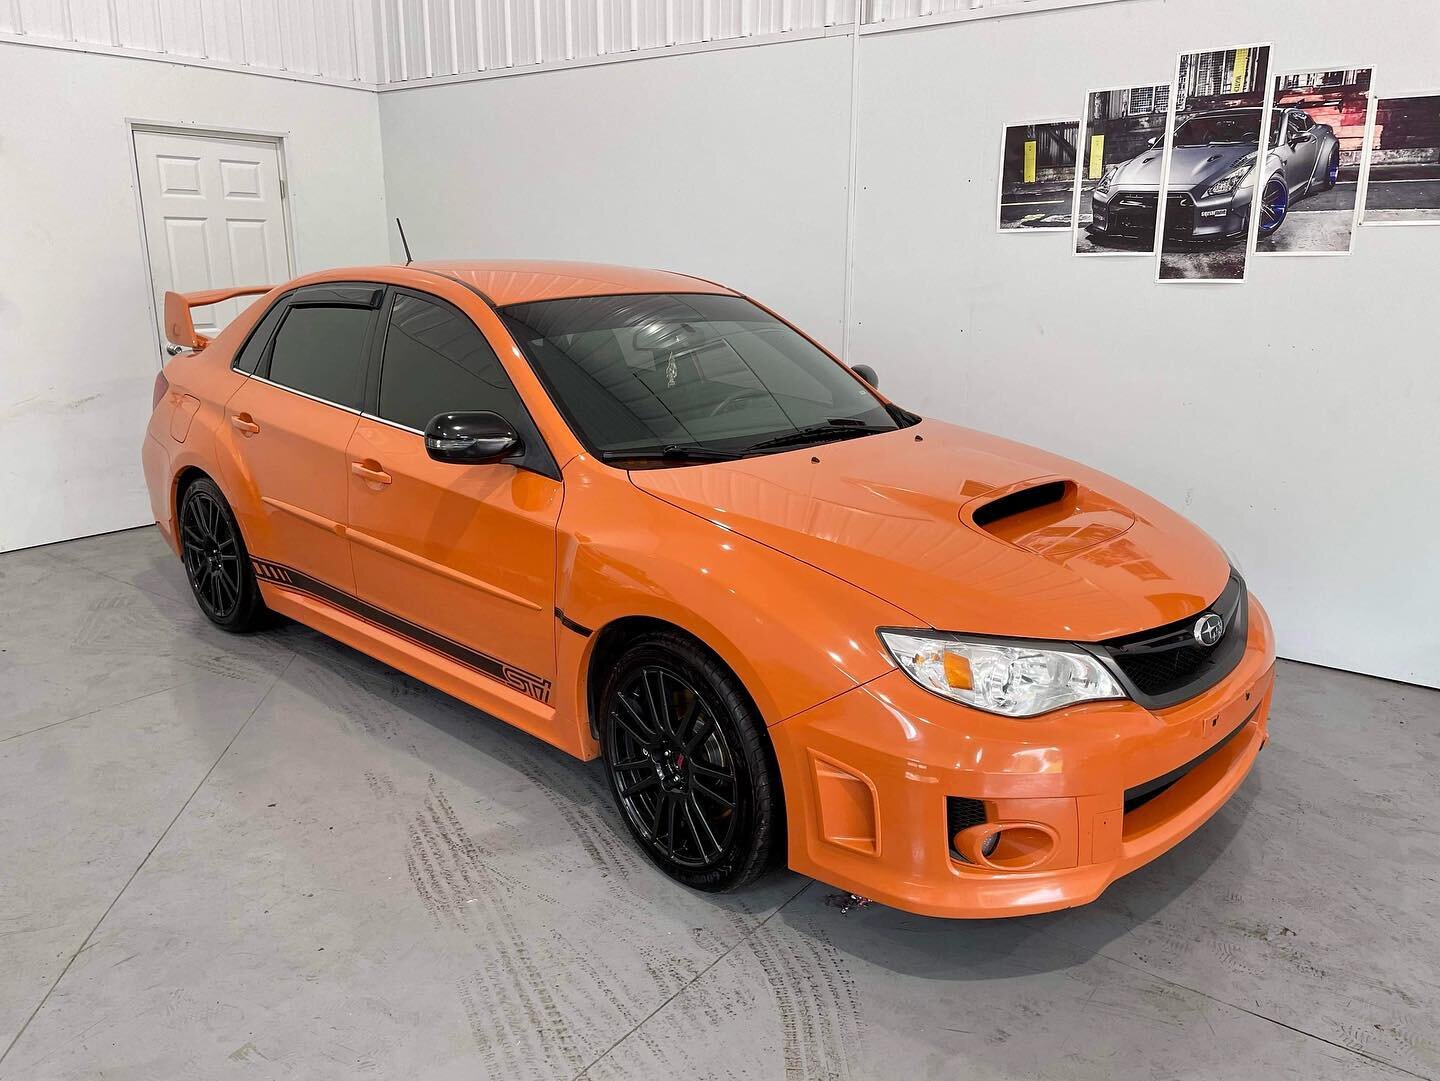 Tangerine 🍊 STi 1 of 100 ever made.
New longblock, clutch, turbo, and various other things just completed by @dialedinperformance 
Only modification being exhaust, and a Cobb pro tune by Dialed in. 

Priced at $35k